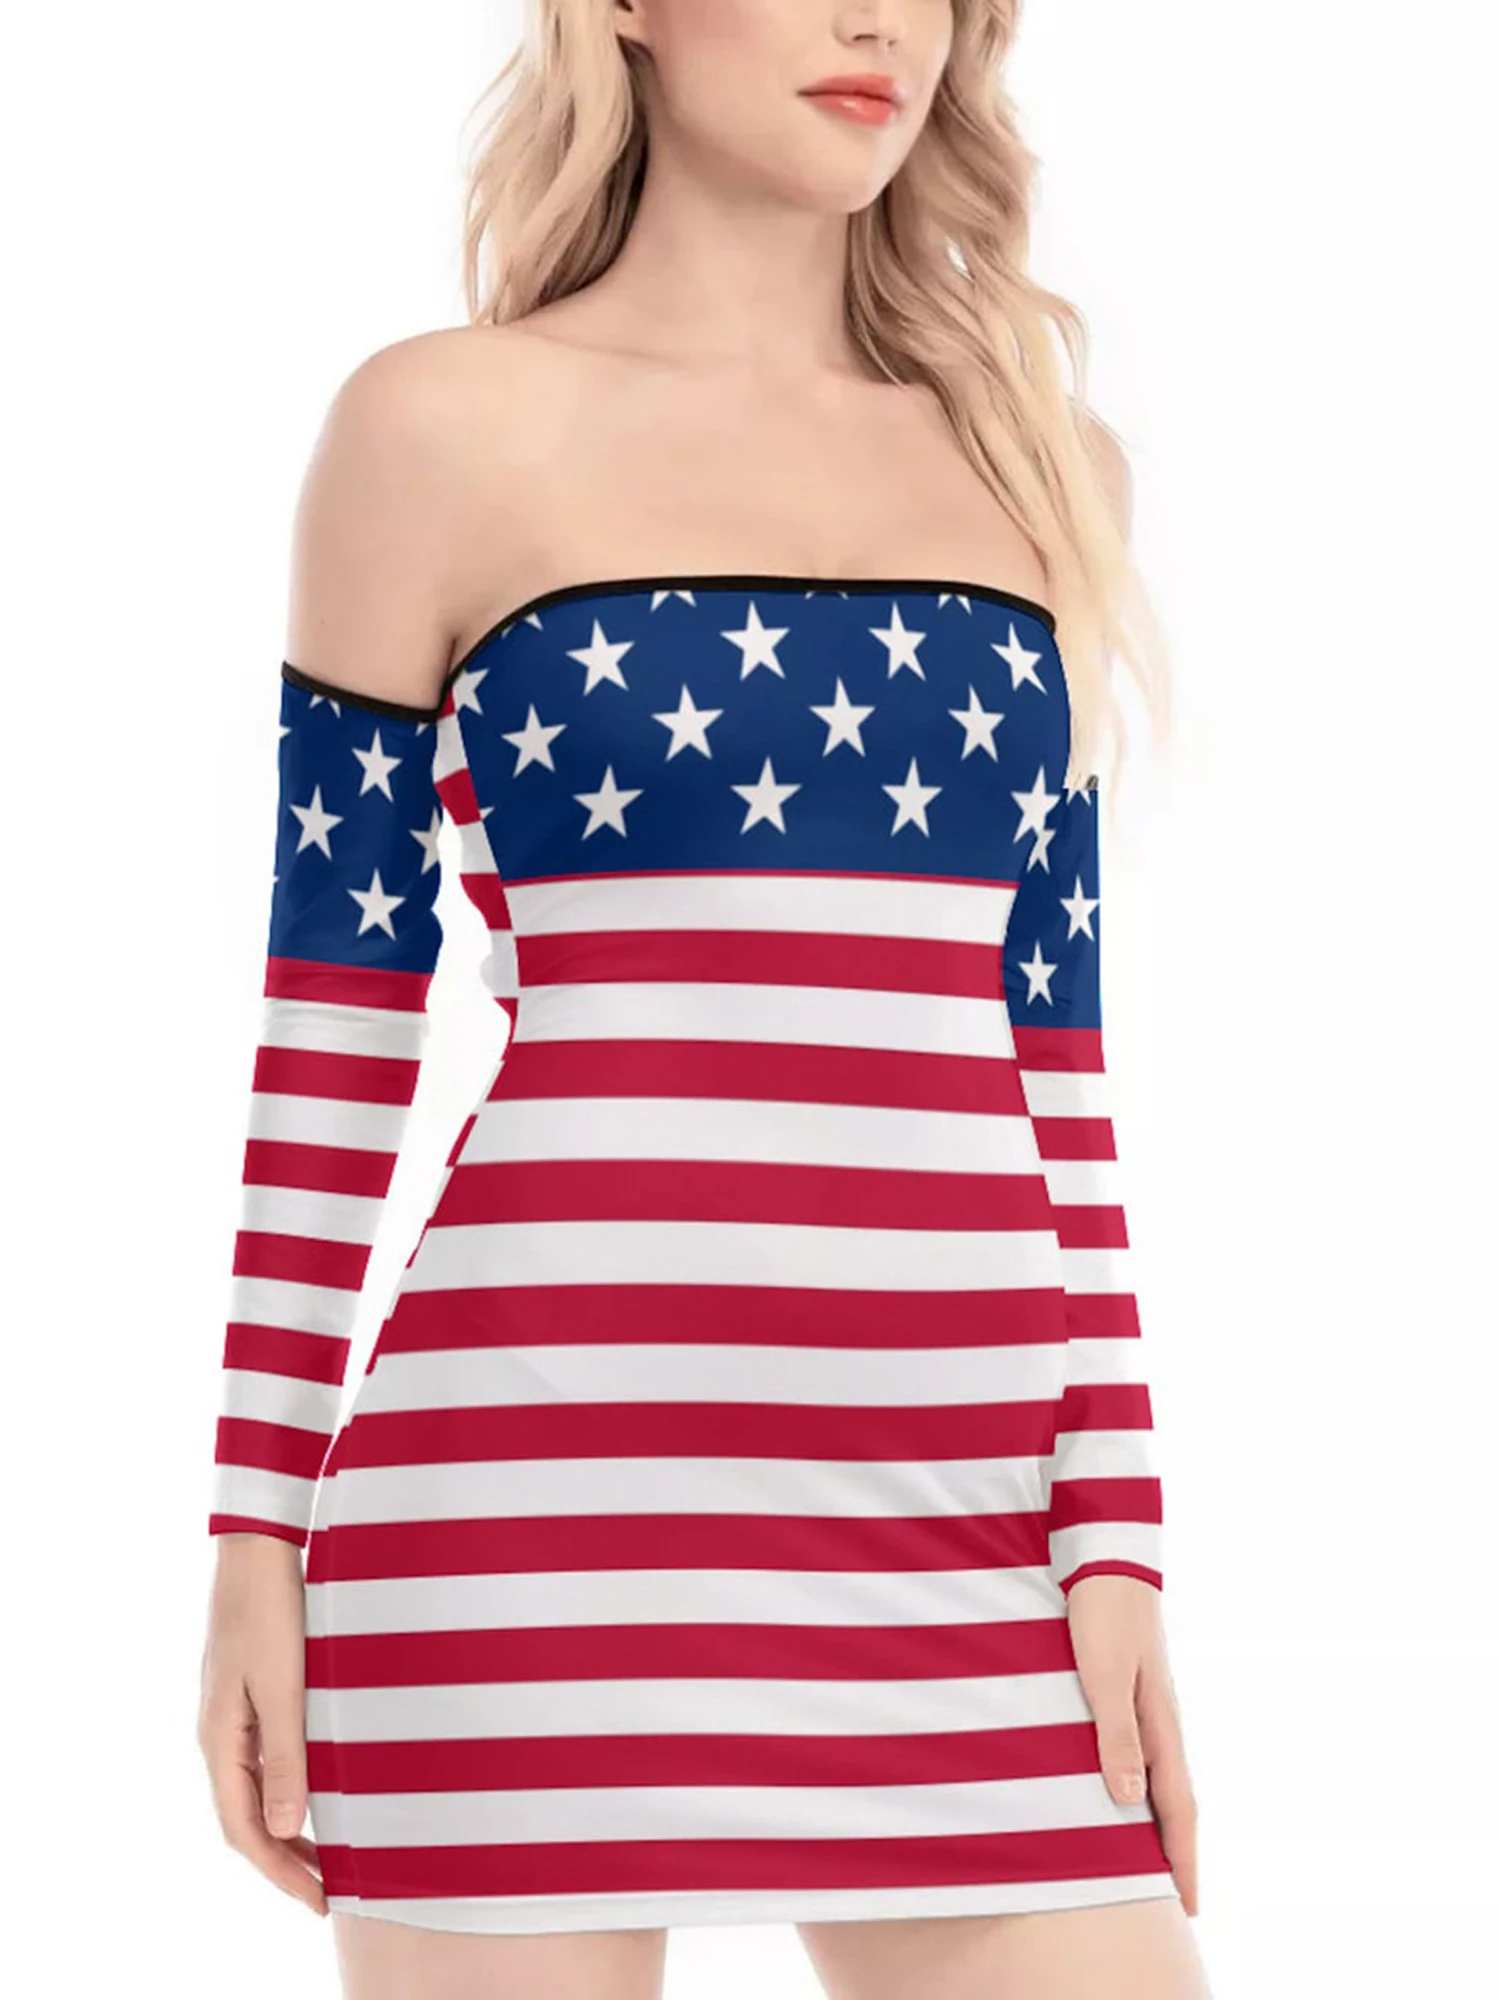 Stylish and Sexy Women s Stripe and Stars Print Strapless Mini Dress for 4th of July Celebrations and Street Fashion